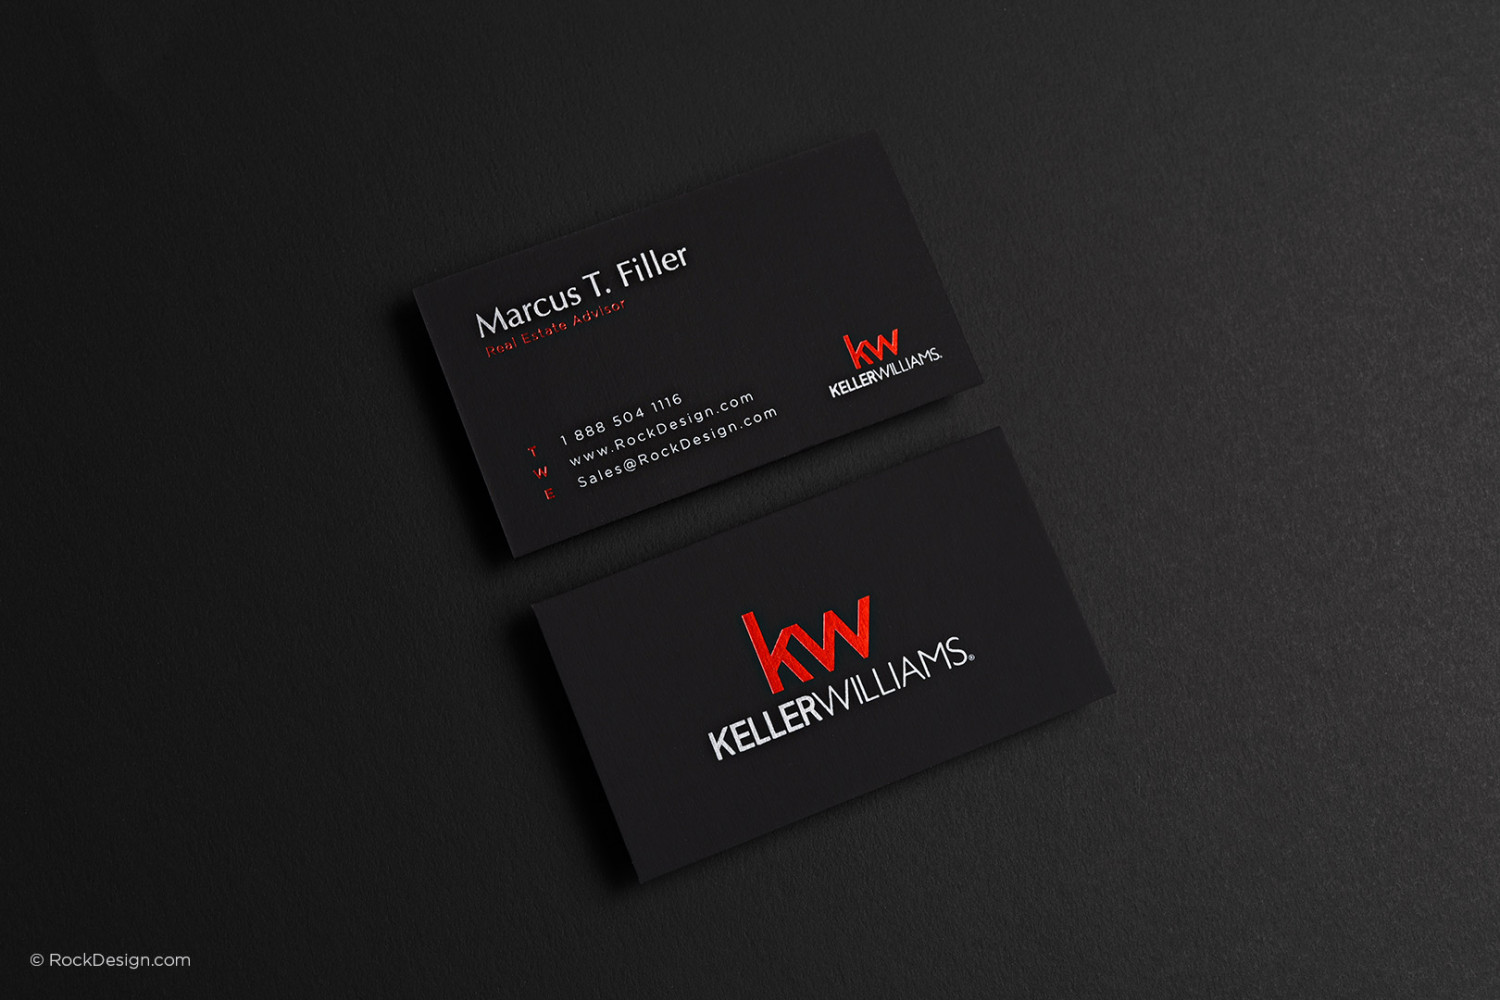 FREE Keller Williams business card template with print service | RockDesign.com1500 x 1000